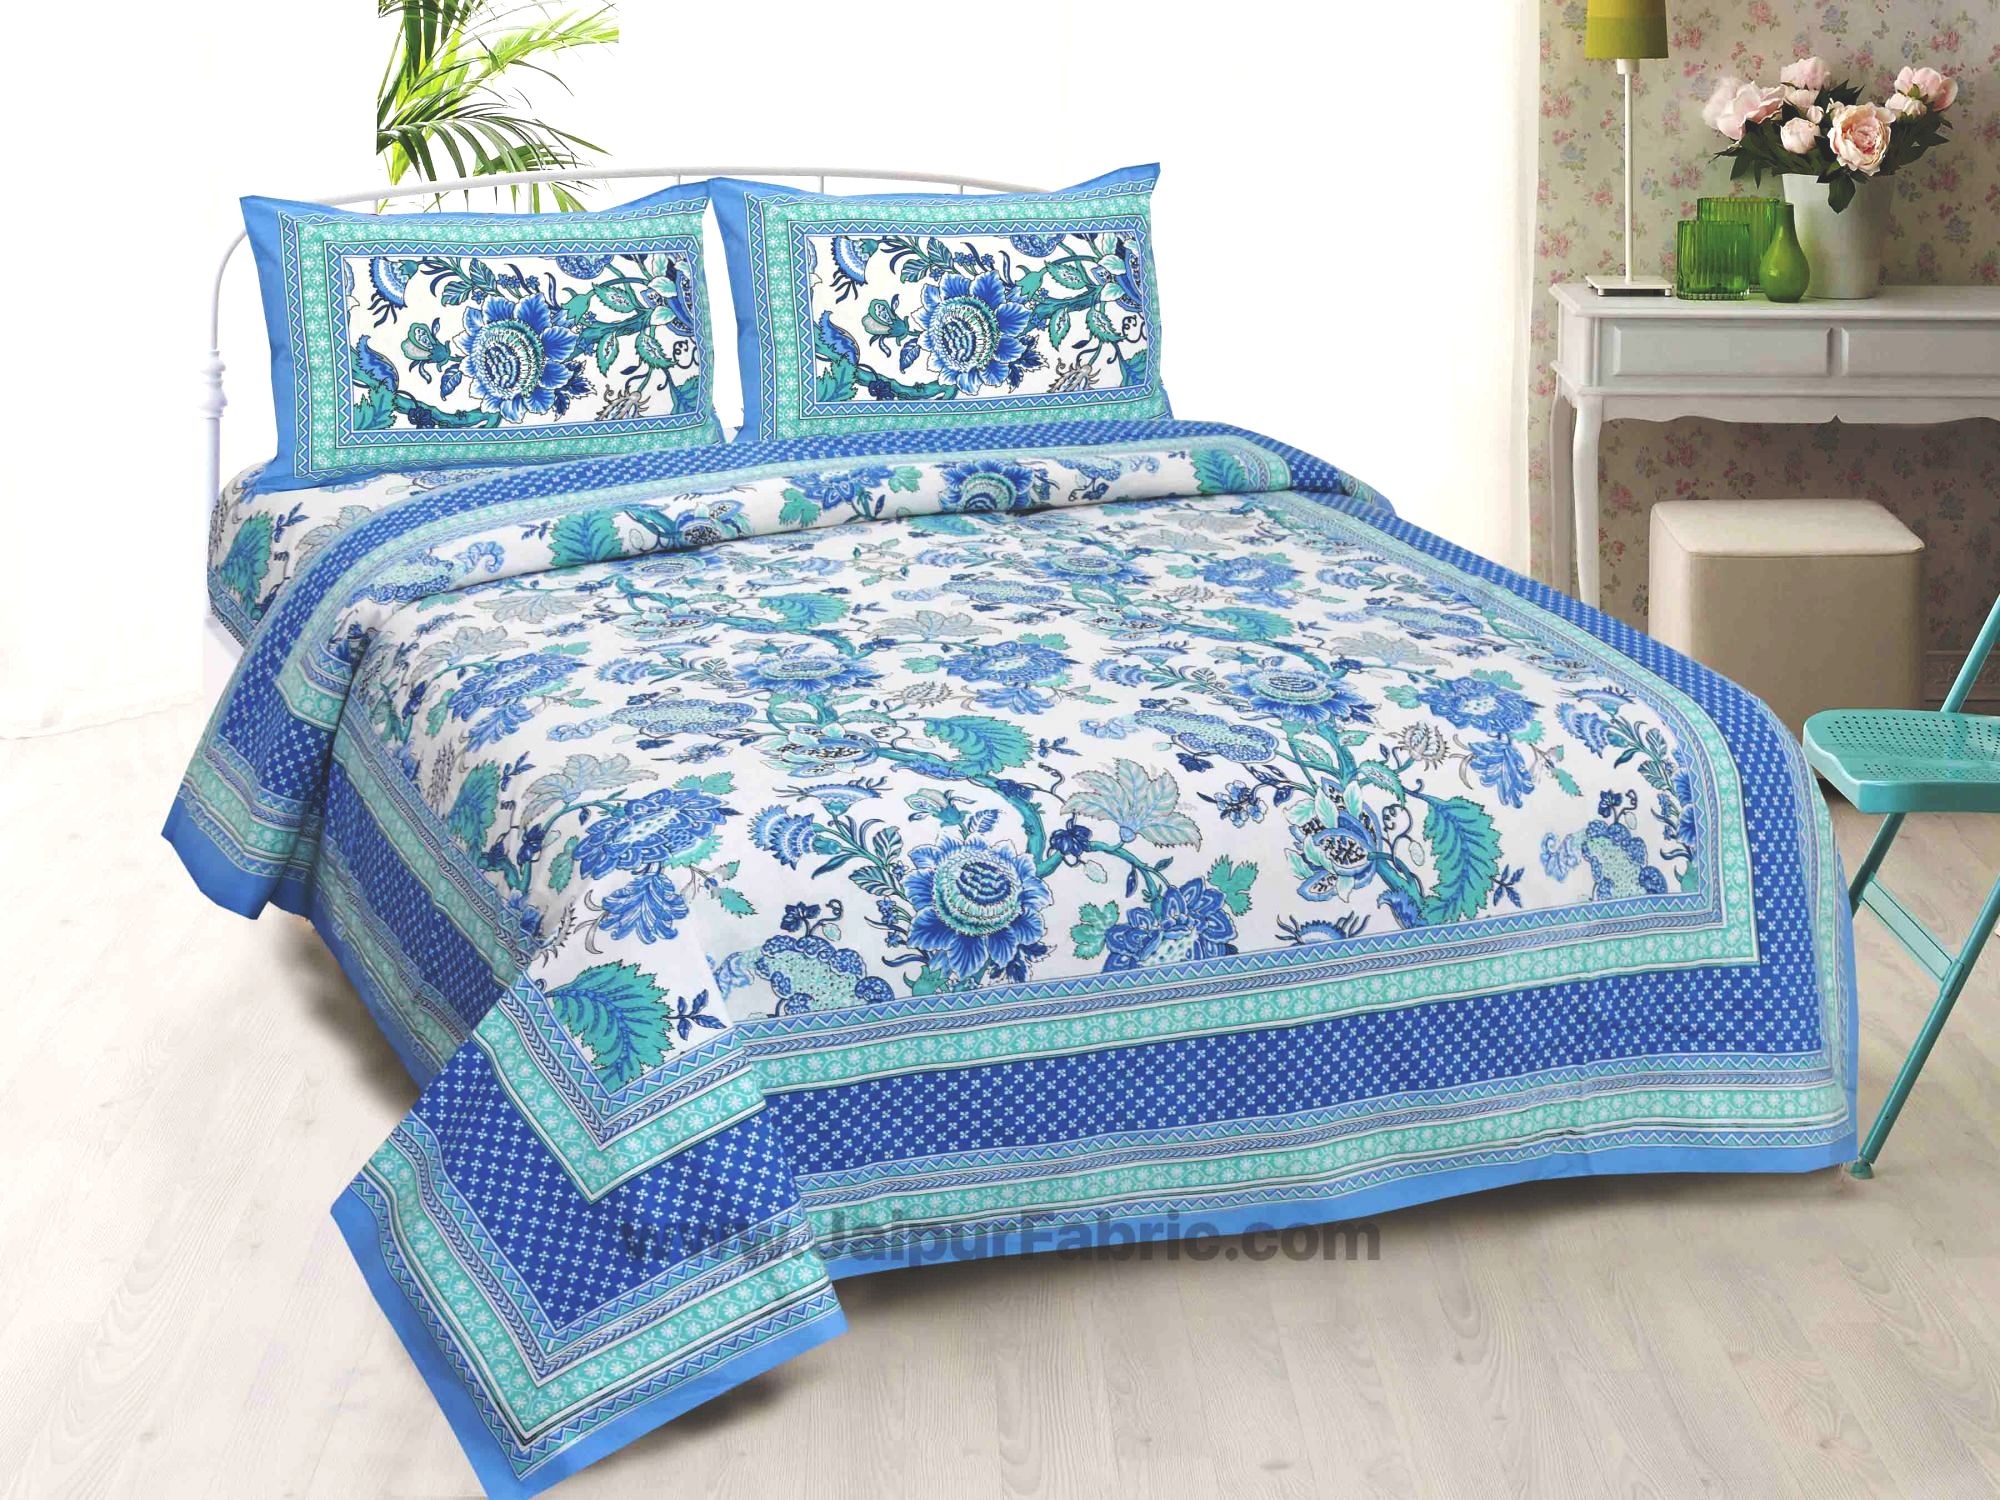 Combo371 Bed in a Bag Blue Floral  1 Dohar + 1 Double BedSheet + 2 Pillow Covers